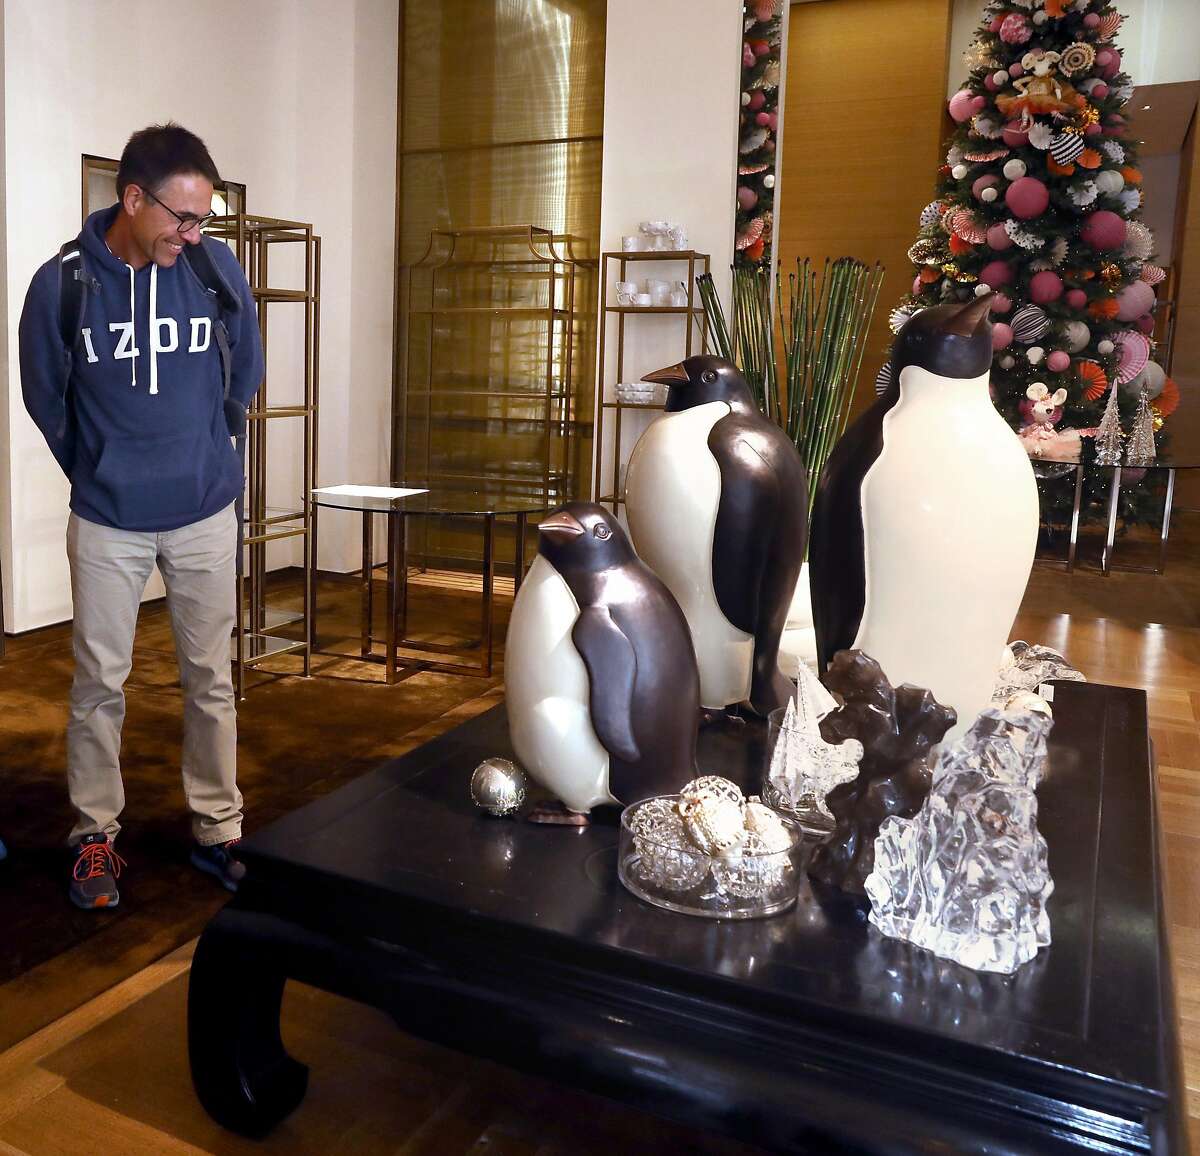 Andreas Huttmann visiting from Germany admires the penguin artwork from Robert Kuo seen at Gump�s which is opening a store in time for the holiday season seen on Post St. near Union Square on Thursday, Oct. 3, 2019, in San Francisco, Calif.